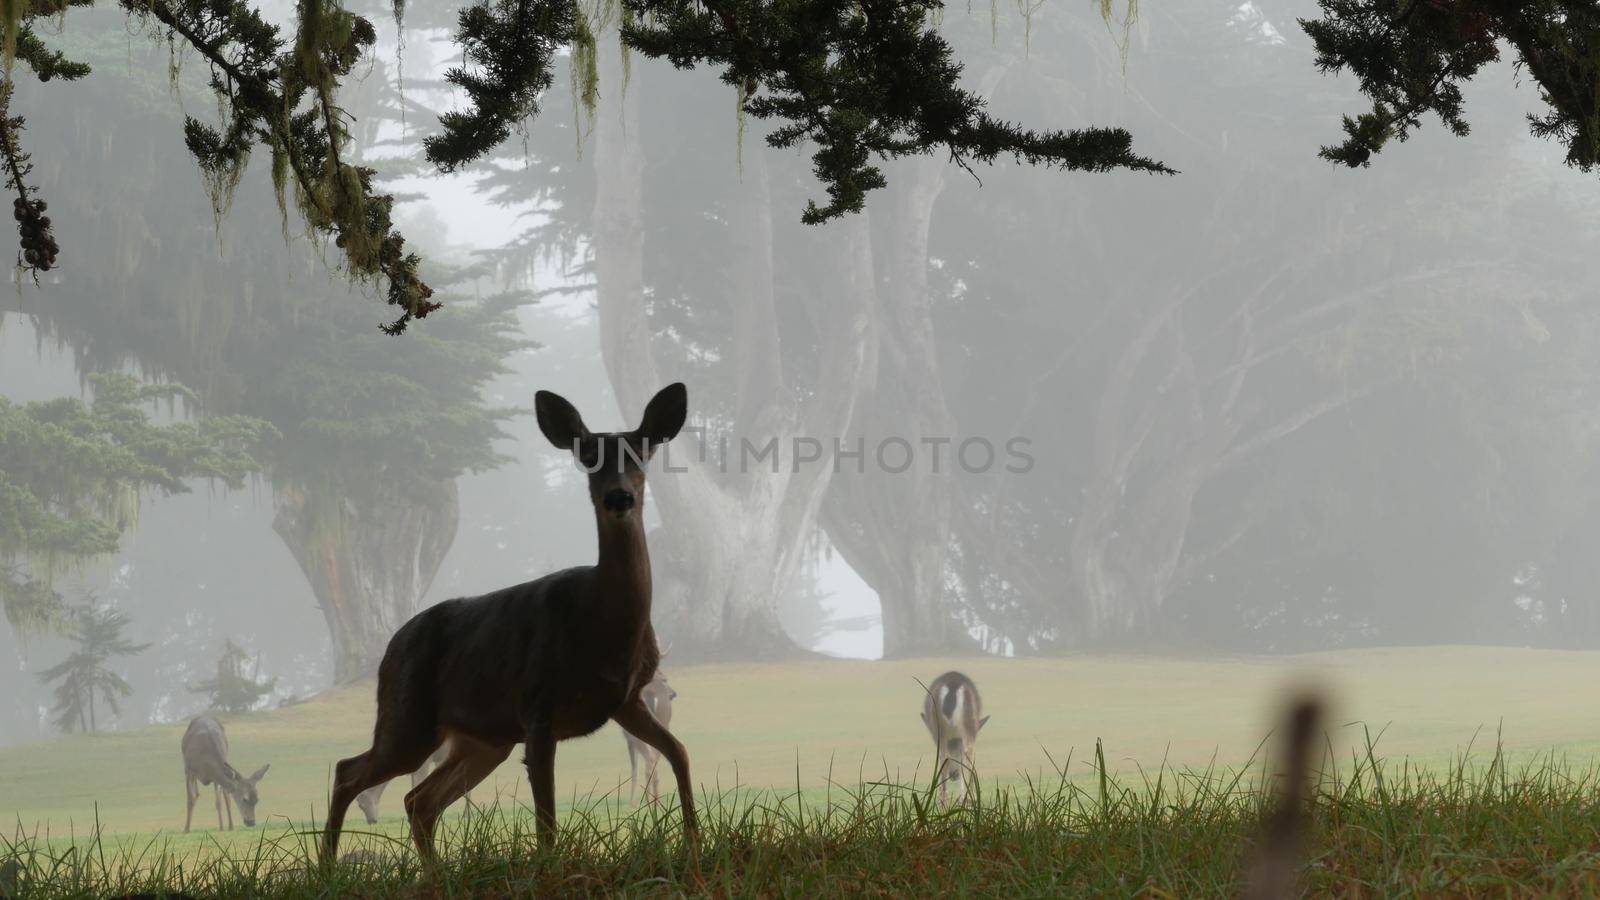 Wild young deer family grazing, green lawn grass, group of animals. Many fawns or calfs in freedom, cypress tree on valley, meadow in foggy forest. Misty weather in Monterey, California wildlife, USA.